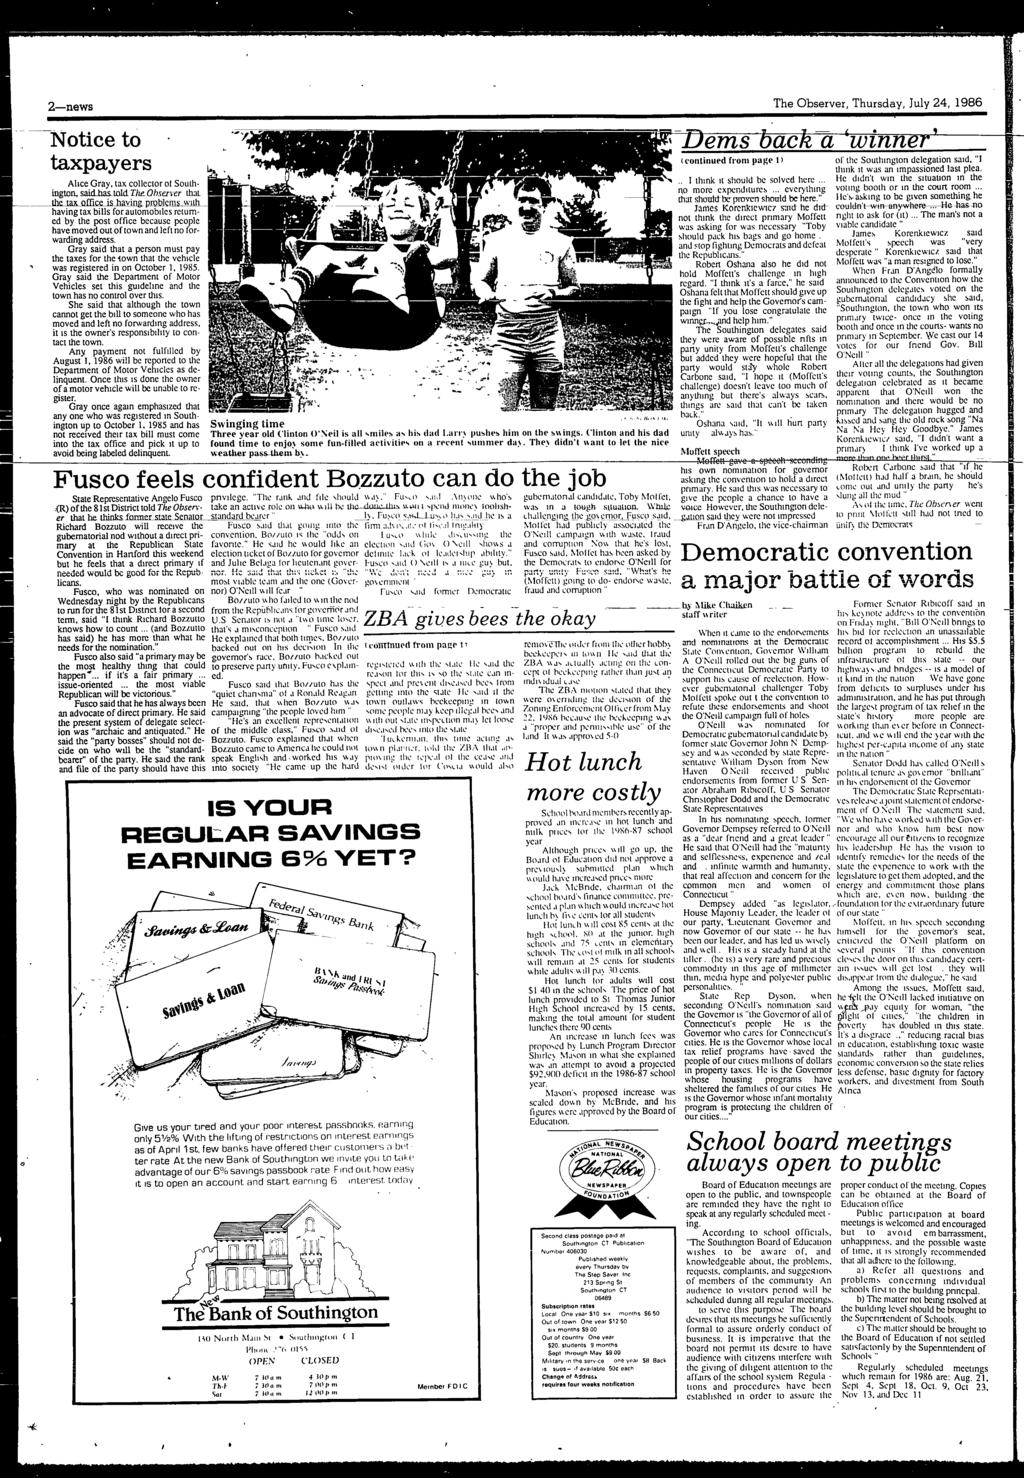 2--news The Observer, Thursday, July 24, 1986 Notice to taxpayers Alice Gray, tax collector el Southington, s,q Lhas_toM TlmObse.